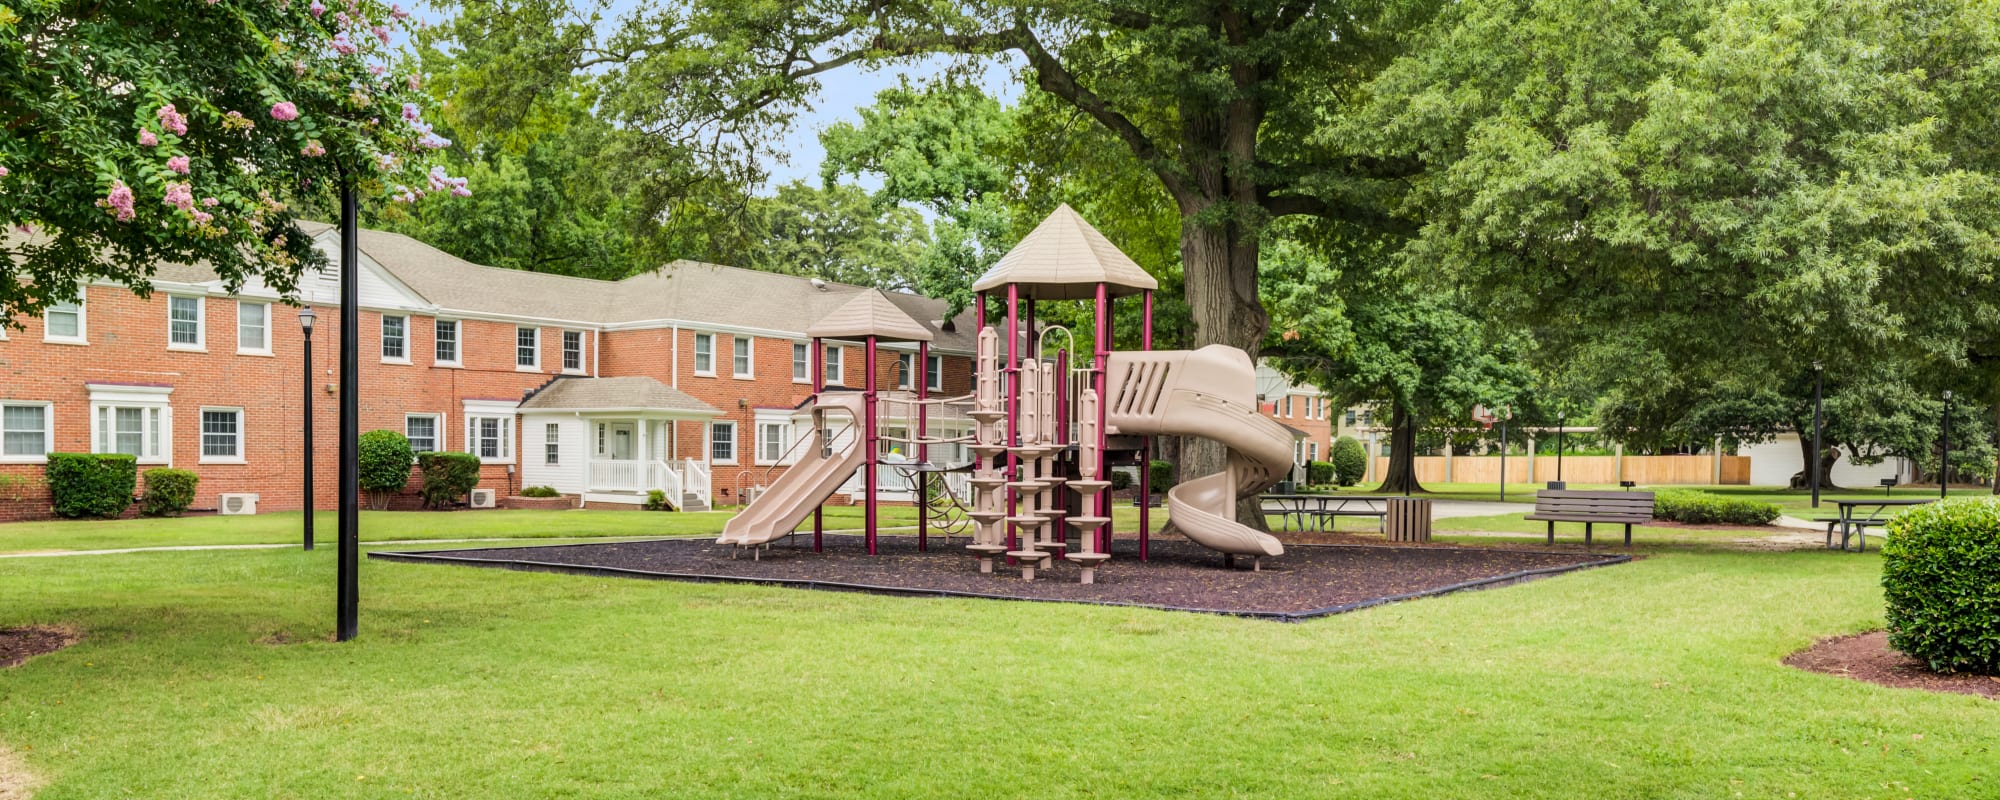 A playground at H Qtrs in Norfolk, Virginia